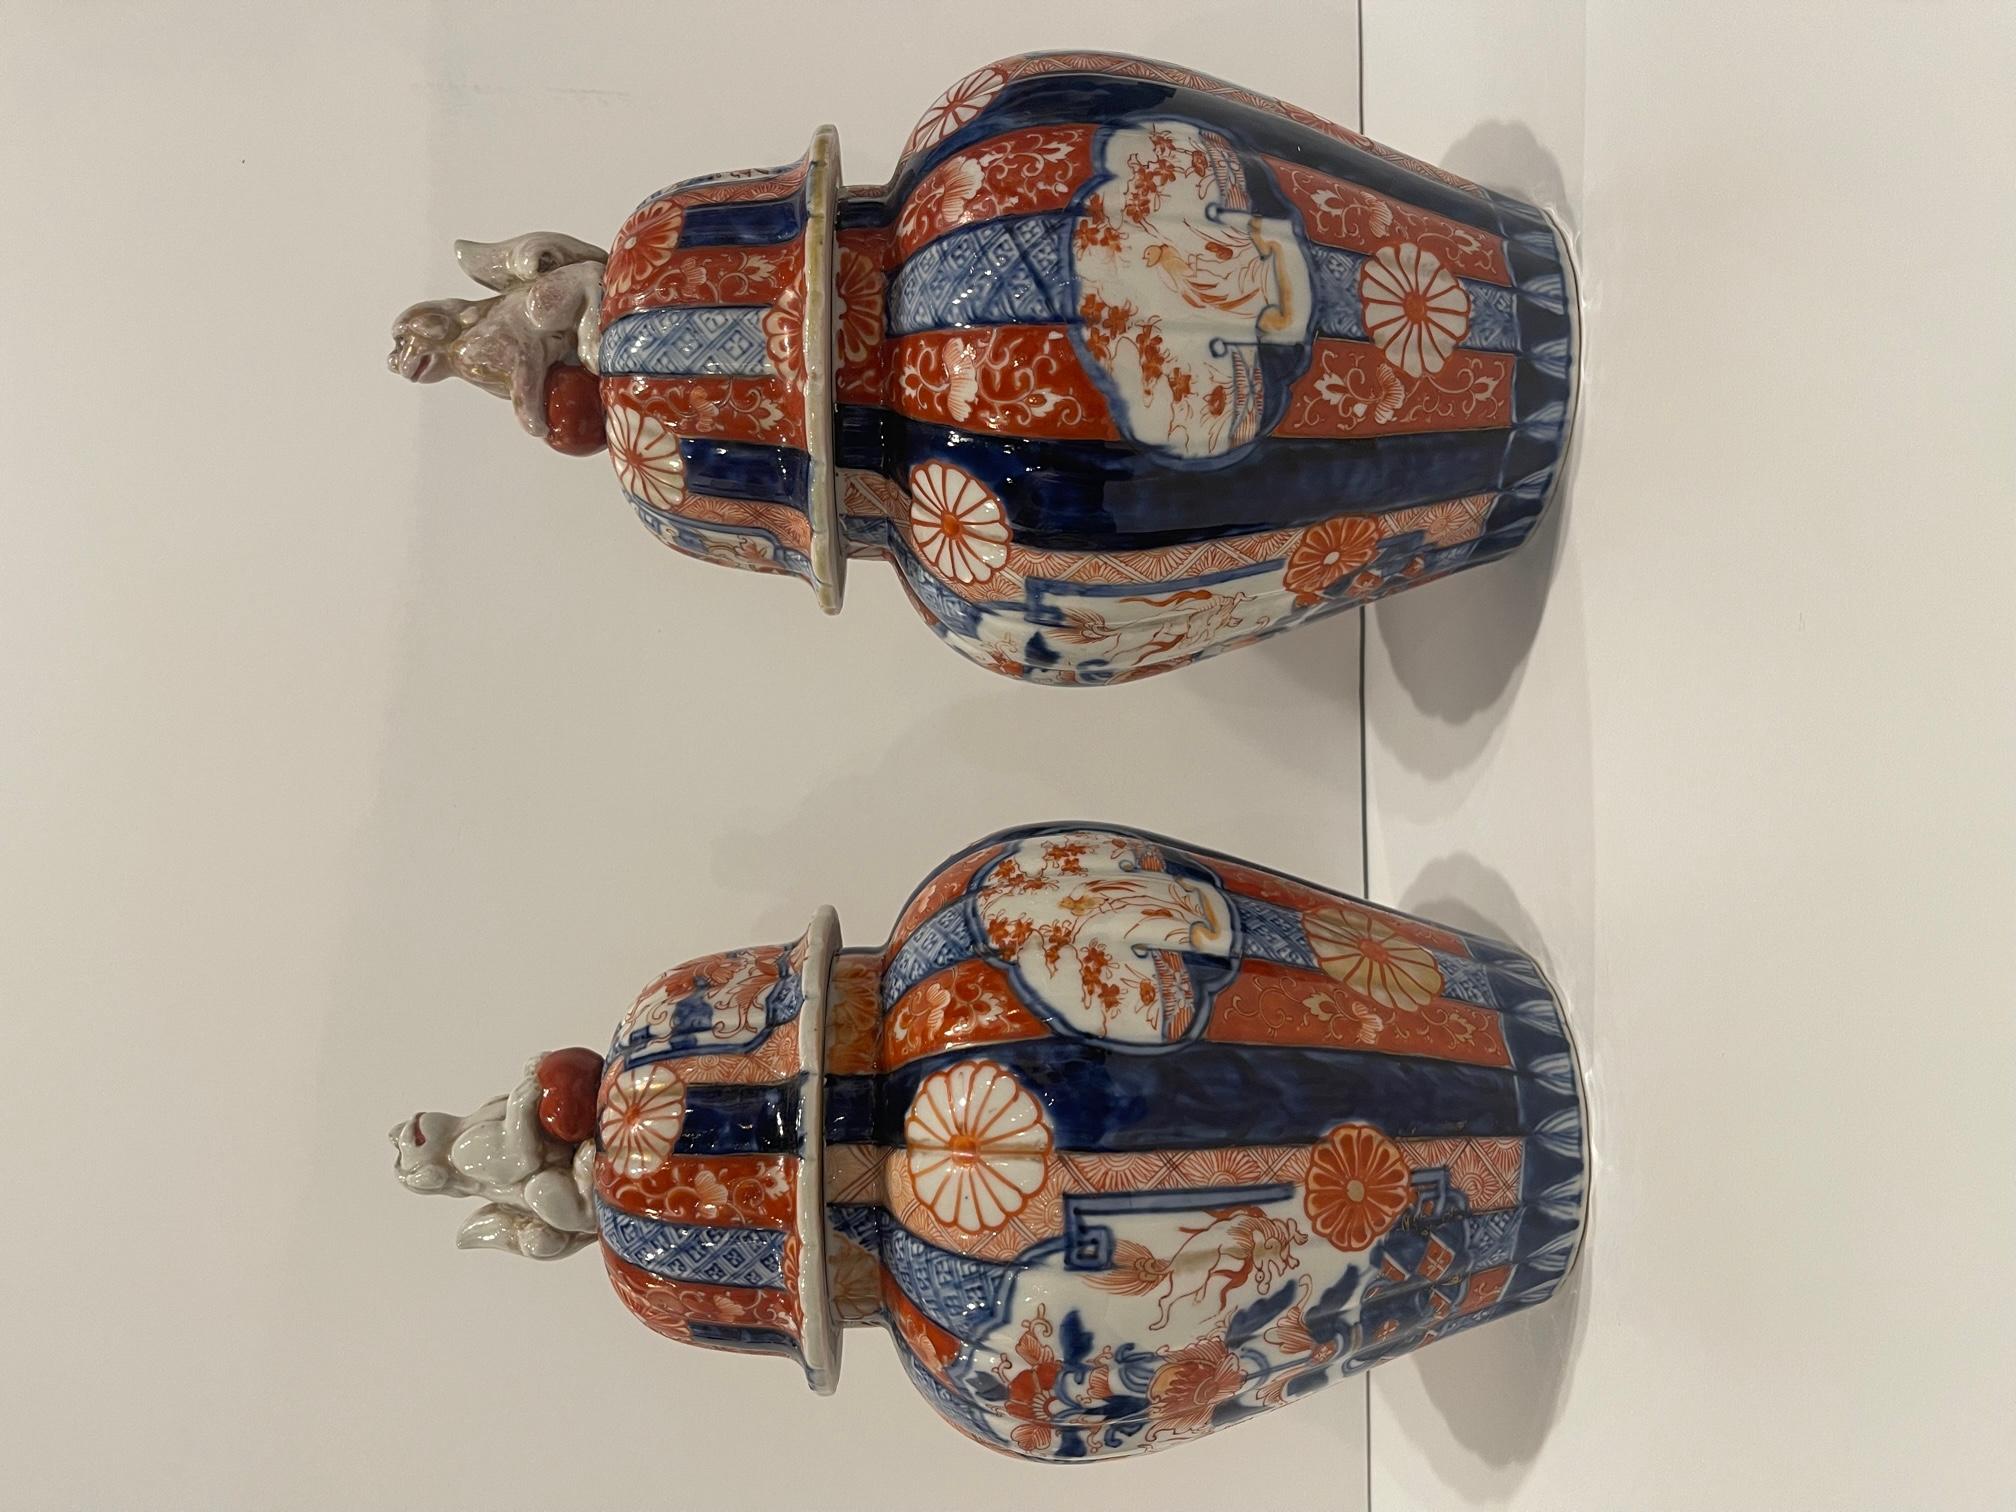 Pair of Japanese Meiji Period Porcelain Lidded Jars, 19th Century .  Wood stands are included